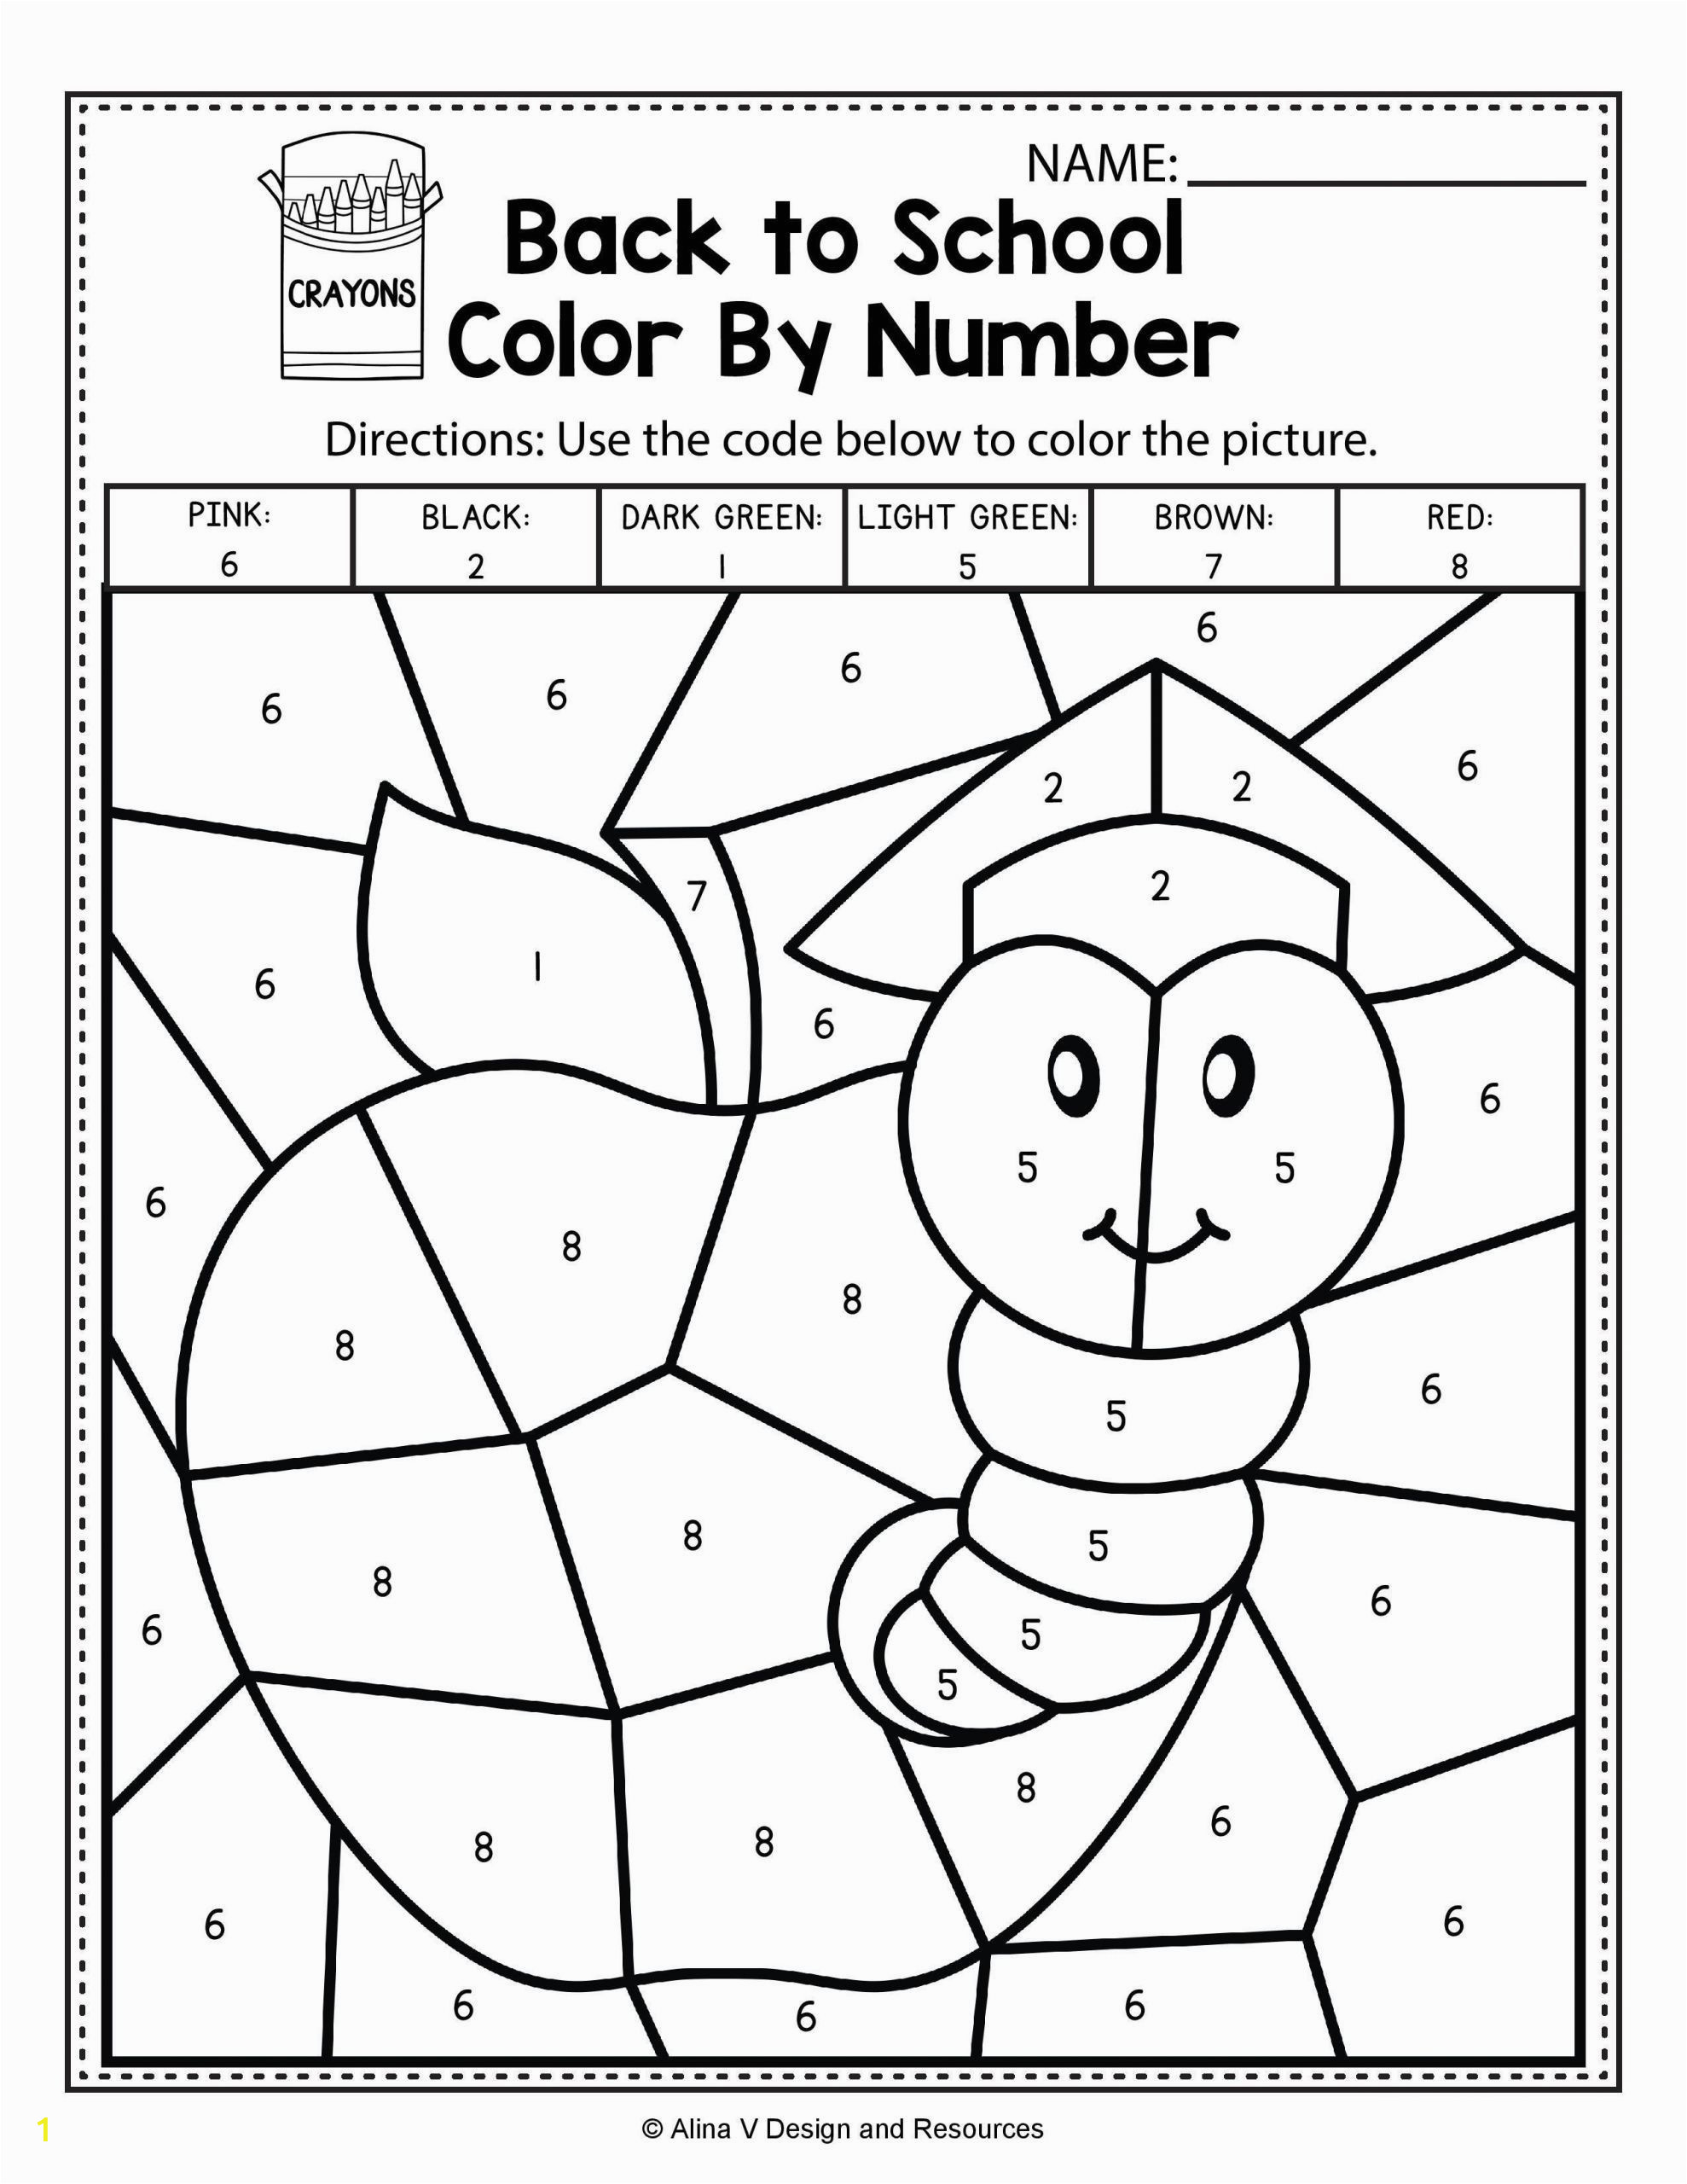 Coloring Pages for First Grade 6 Math Coloring Worksheets 1st Grade Back to School Color by